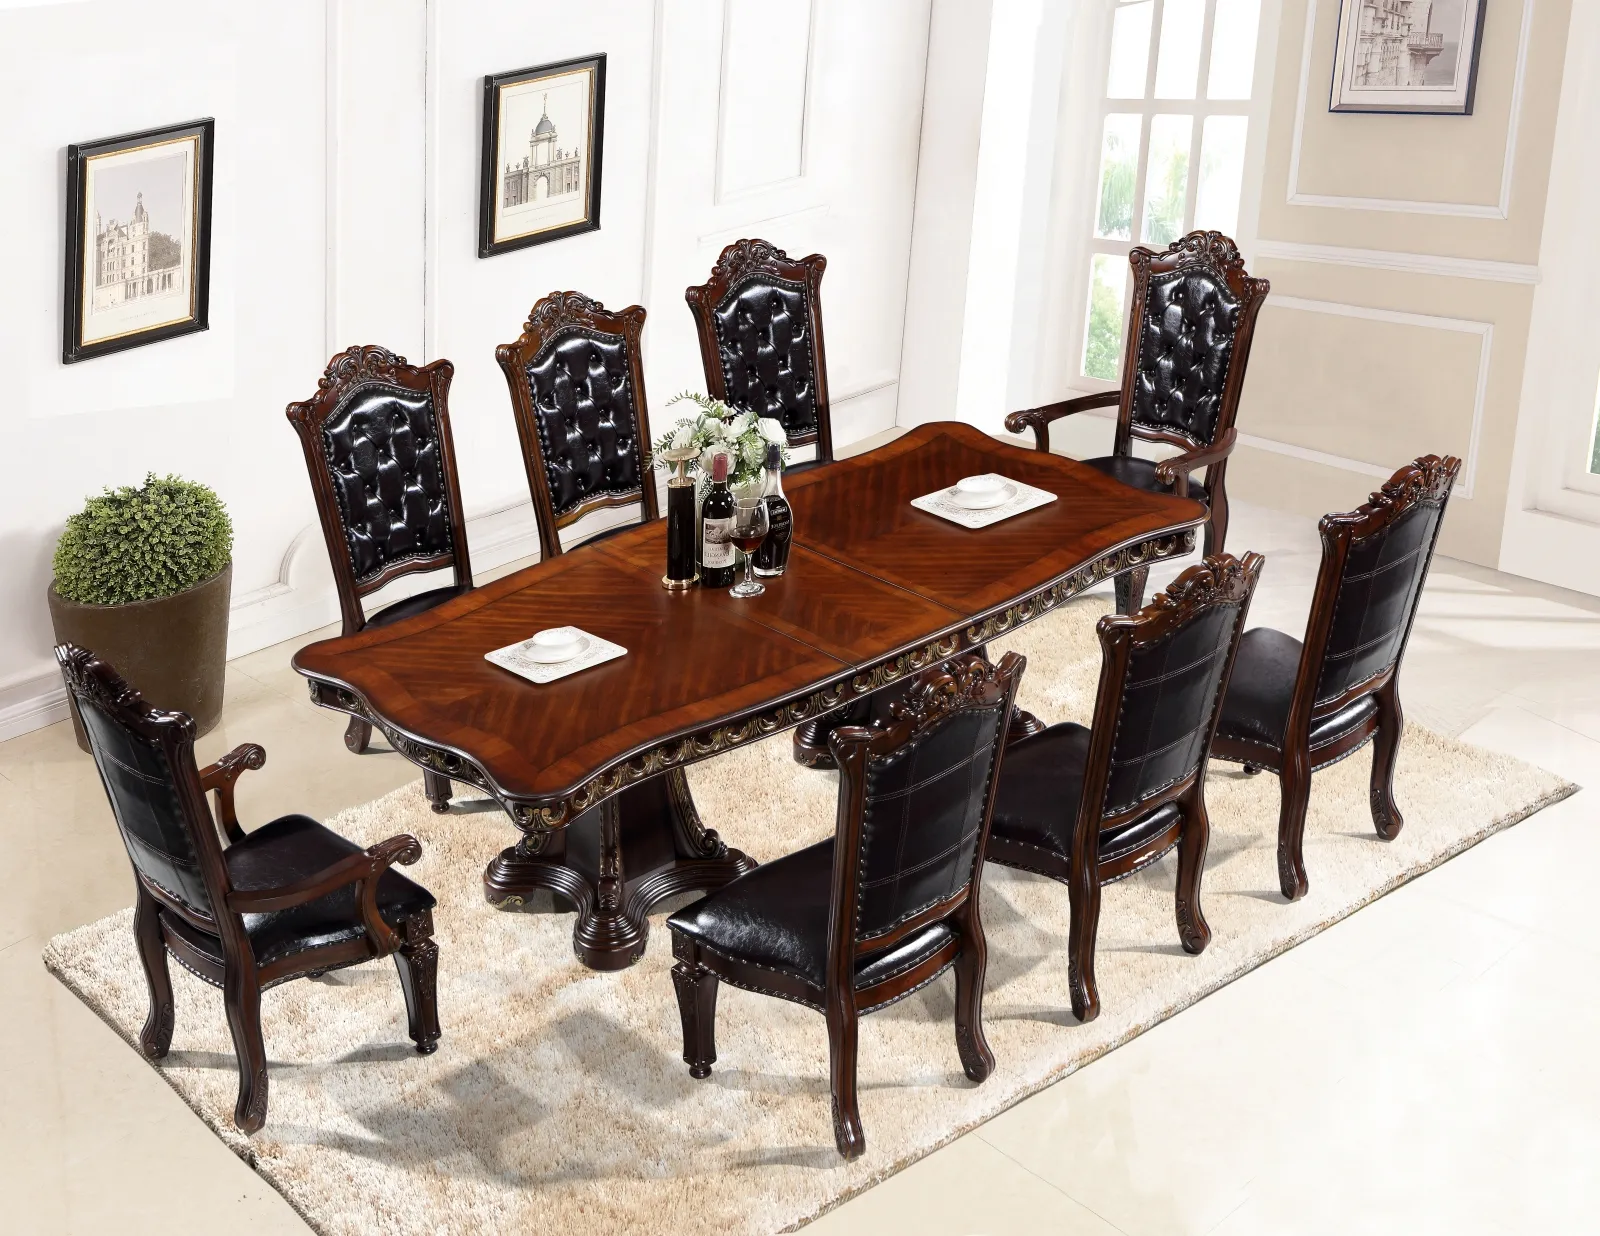 Classic Furniture Wooden Dinner Table Set American Luxury Furniture Dining Room Set Table Chair Hand Carved Wood